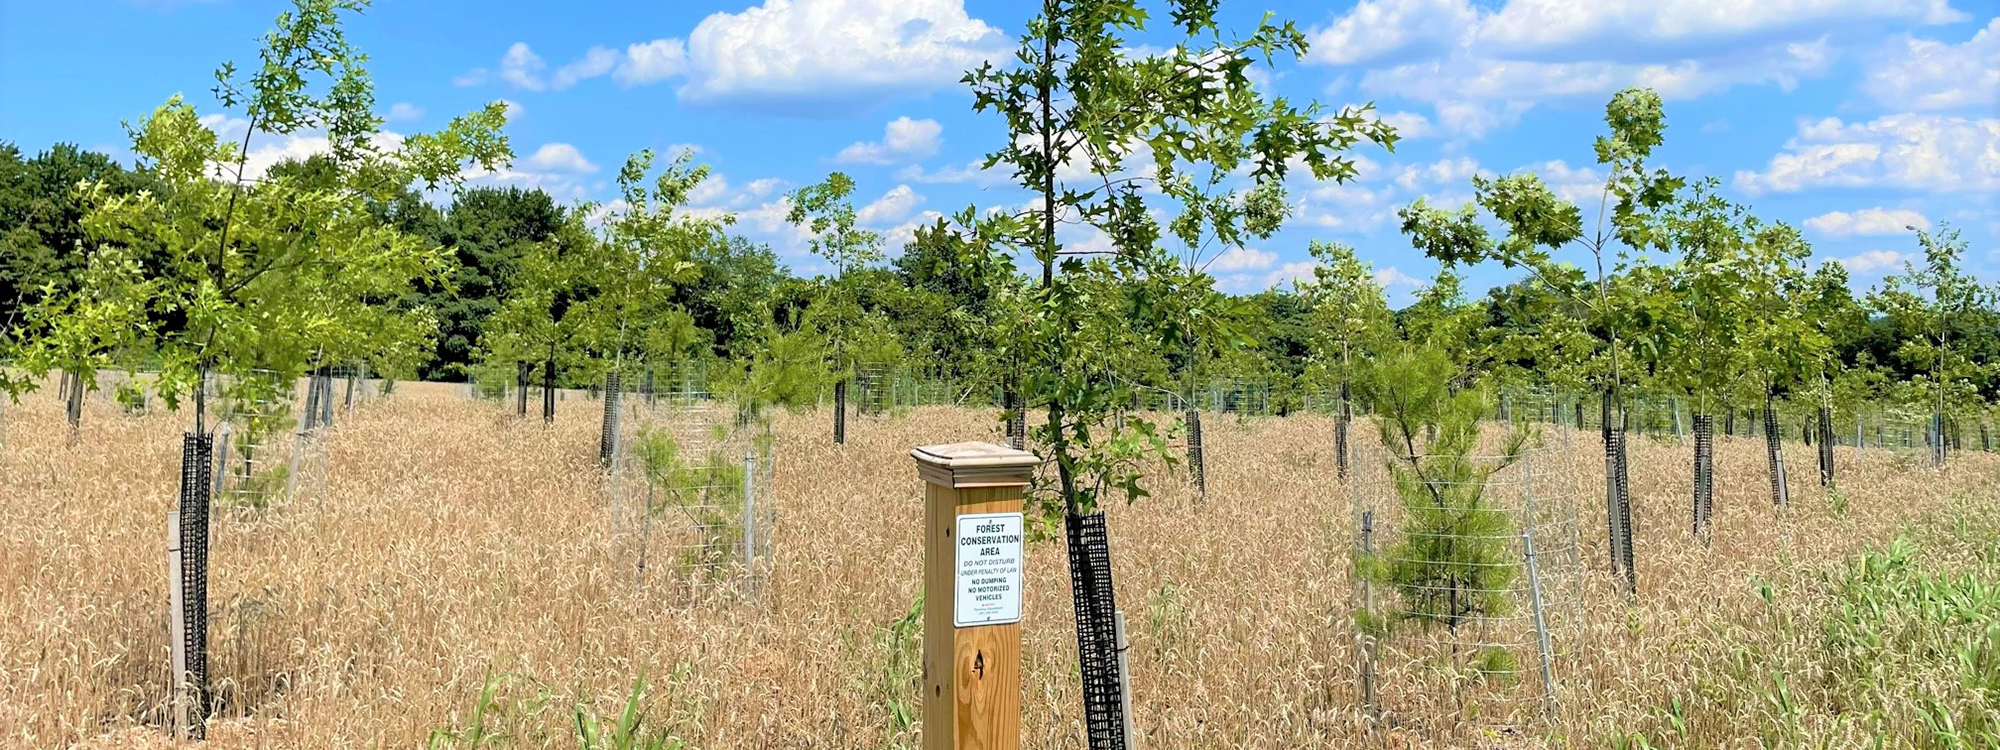 many young trees planted a field. post in forground with a sign indicating it's a forest conservation area